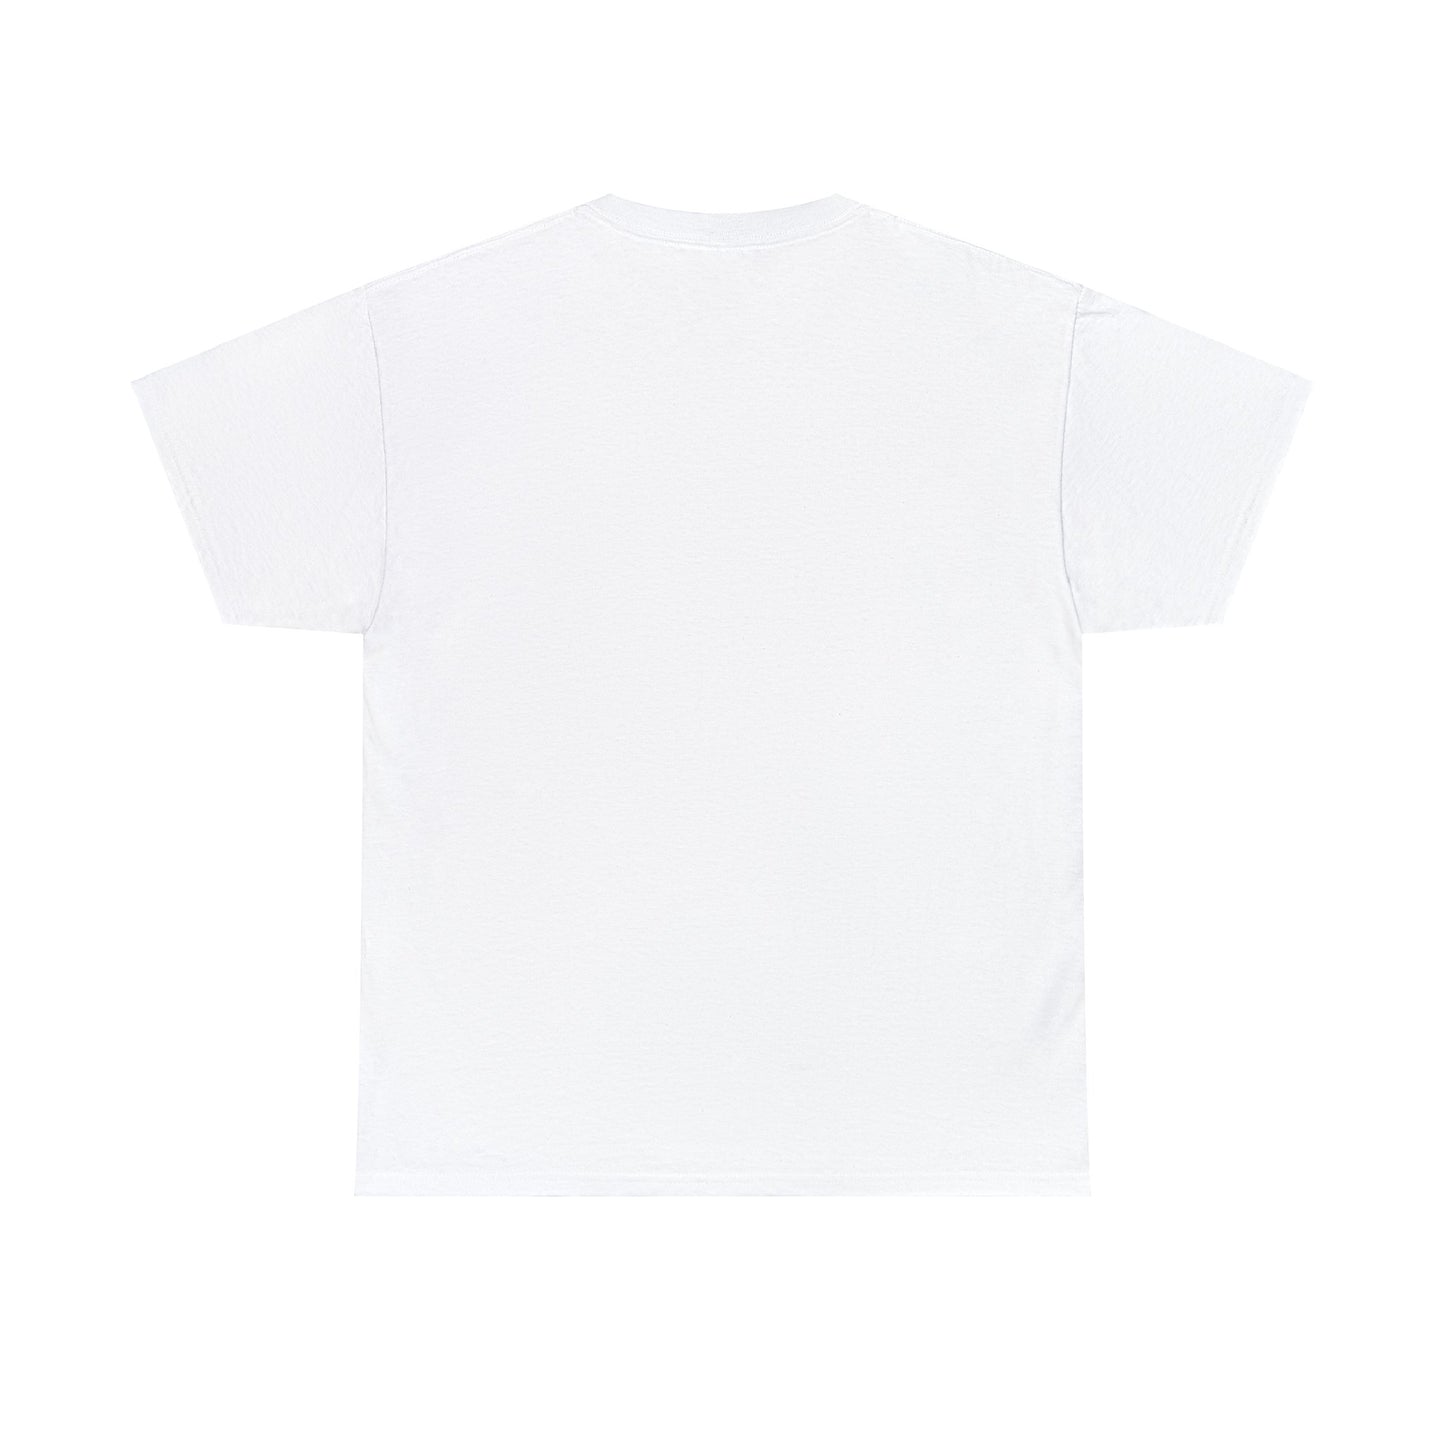 UPW RECOIL PRINTED TEE